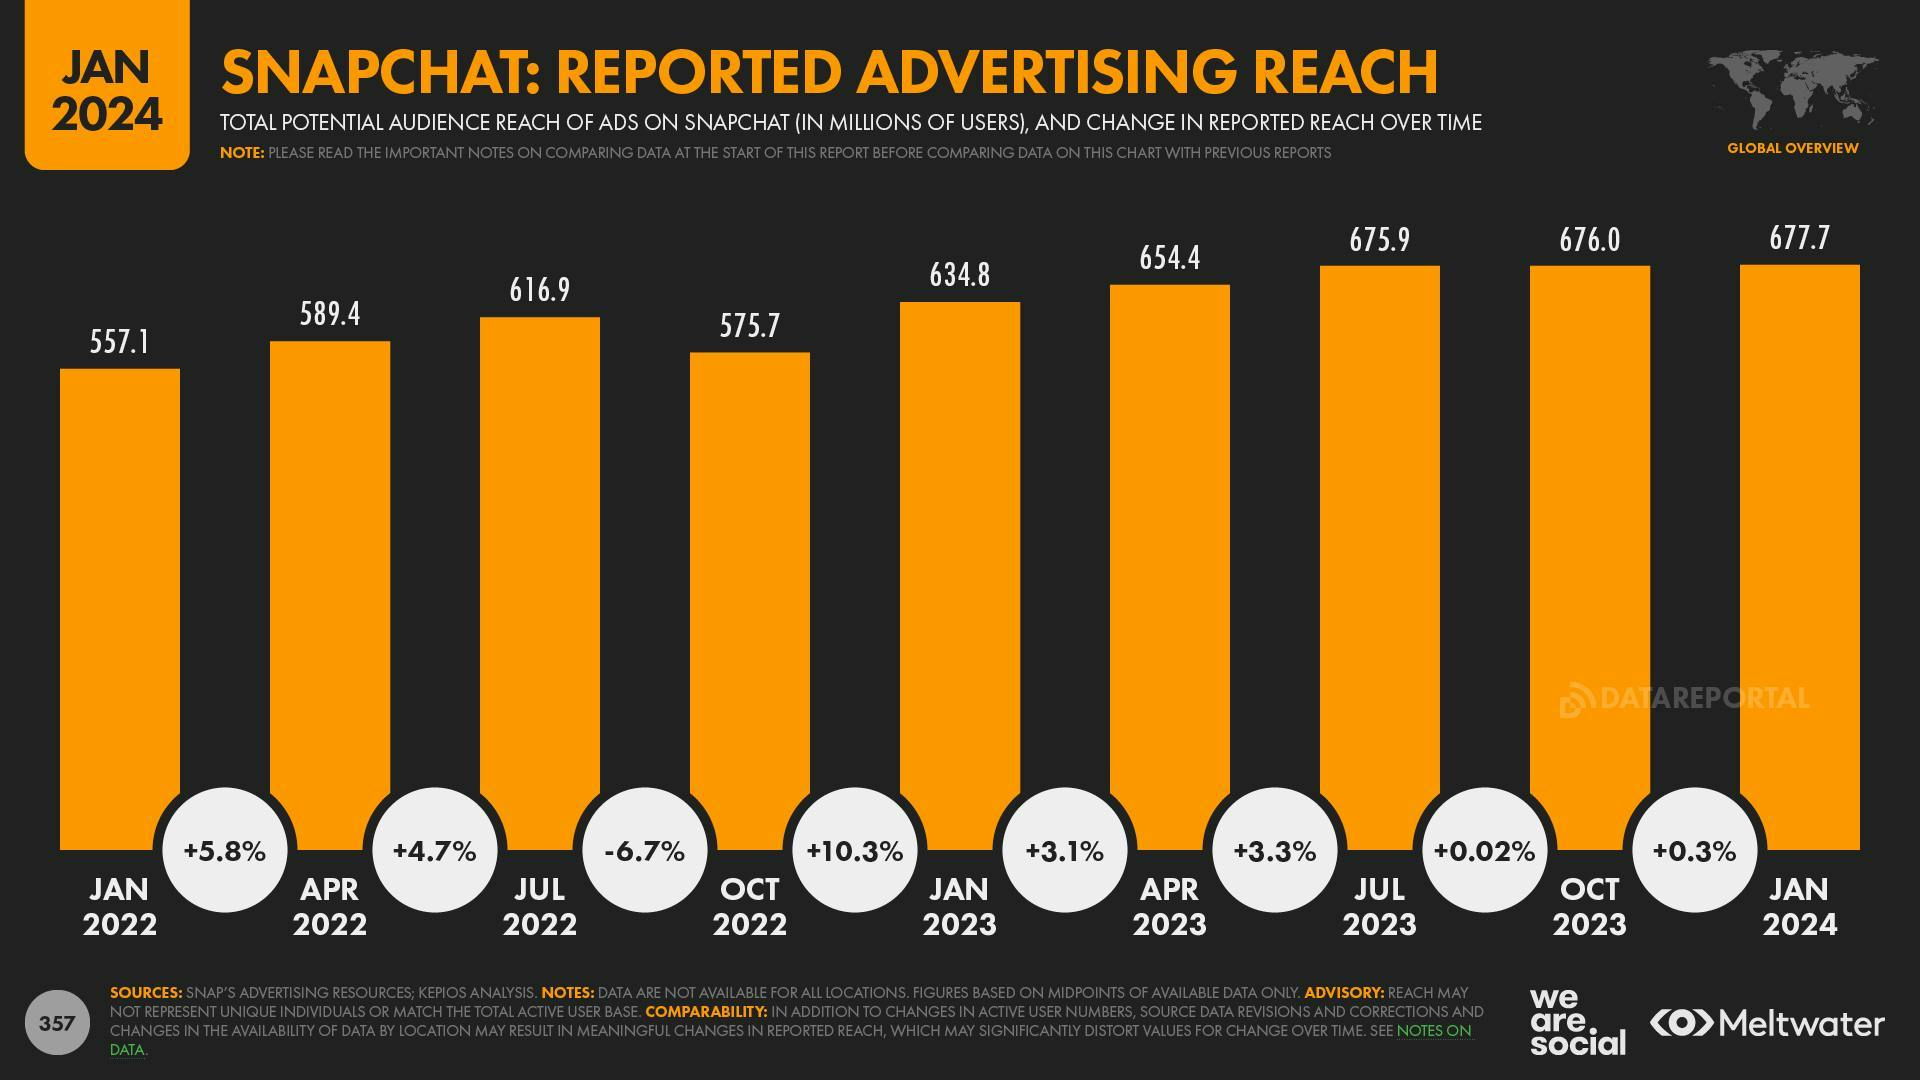 Snapchat: Reported advertising reach